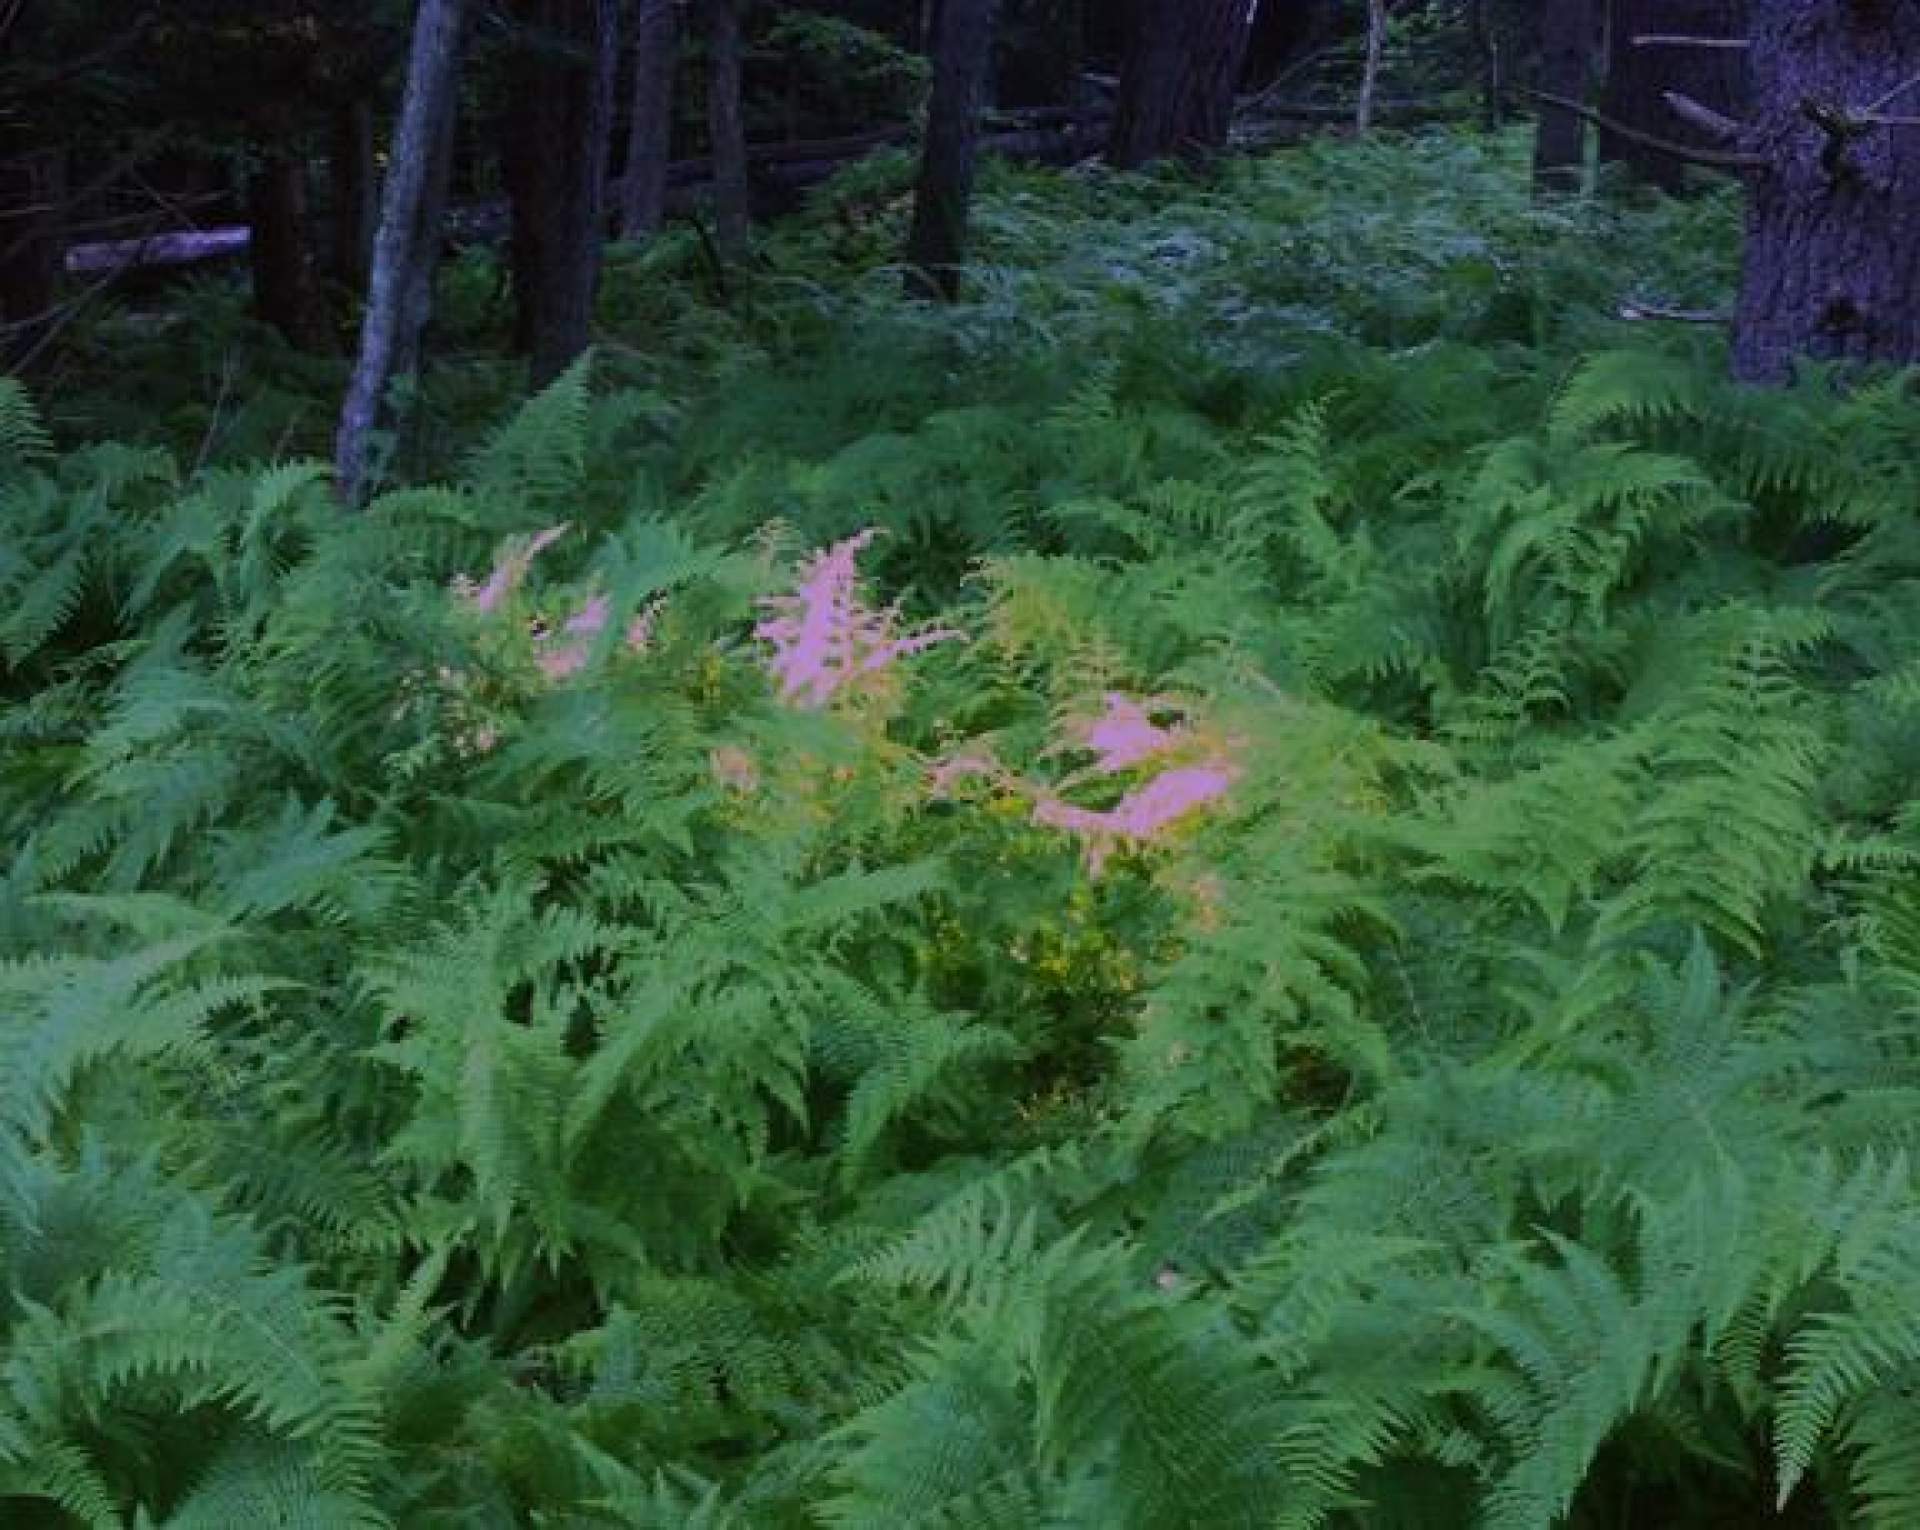 [Janelle Lynch, From the Catskill Mountains, a patch of light in a bed of ferns]